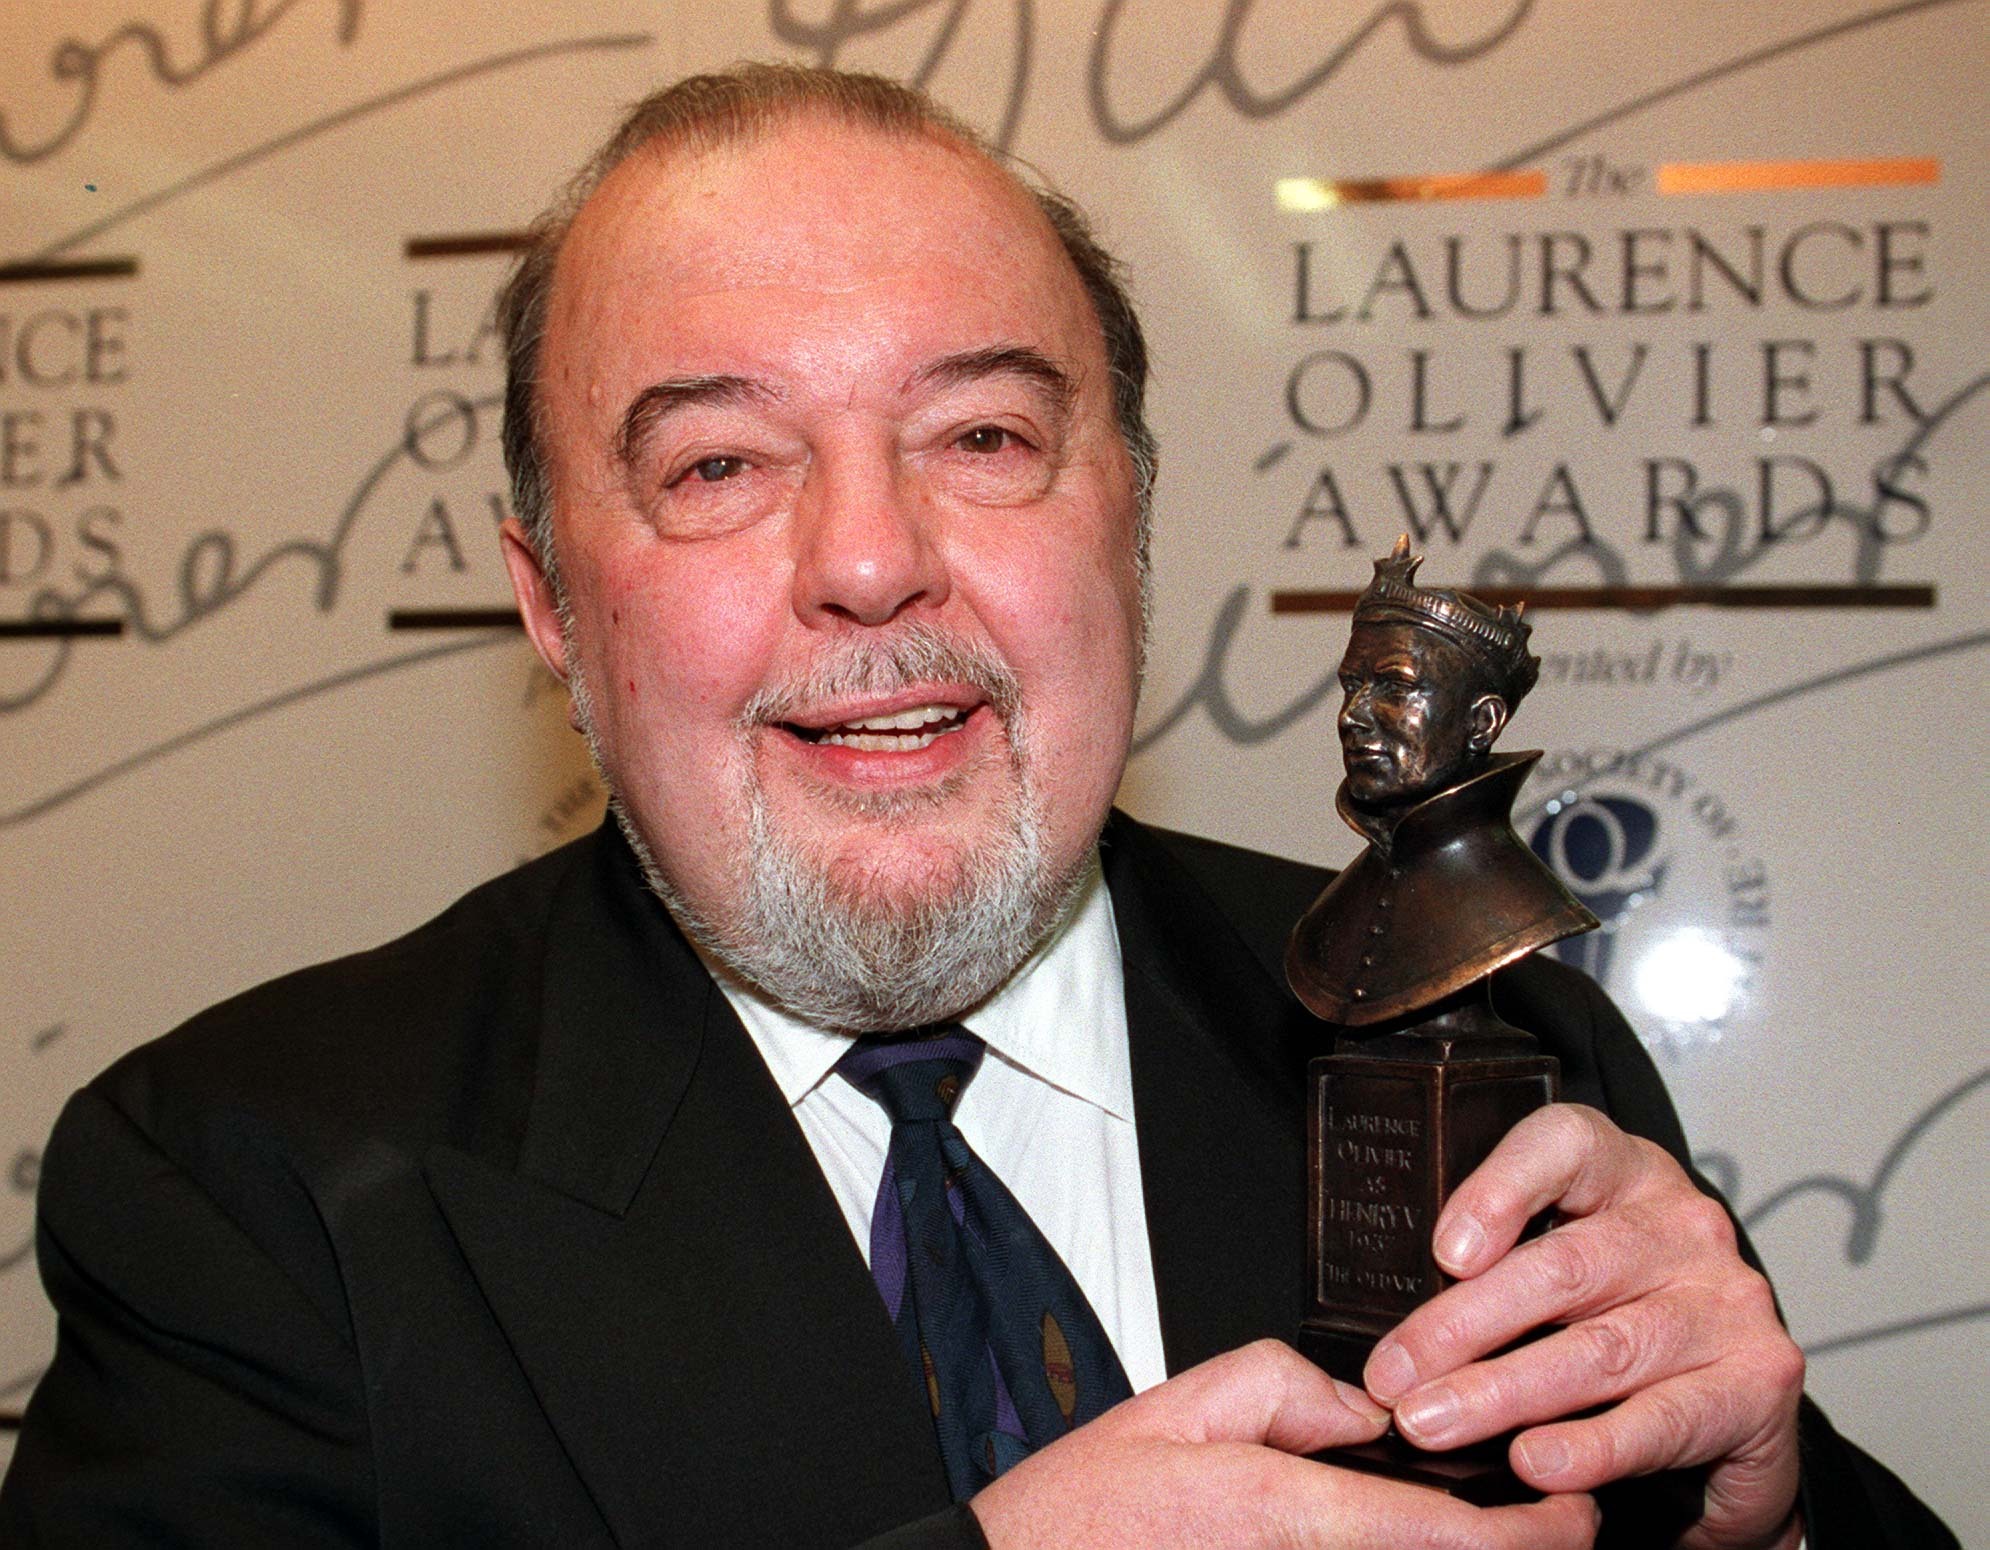 Sir Peter Hall with his award for outstanding contribution to British arts at the Laurence Olivier Awards